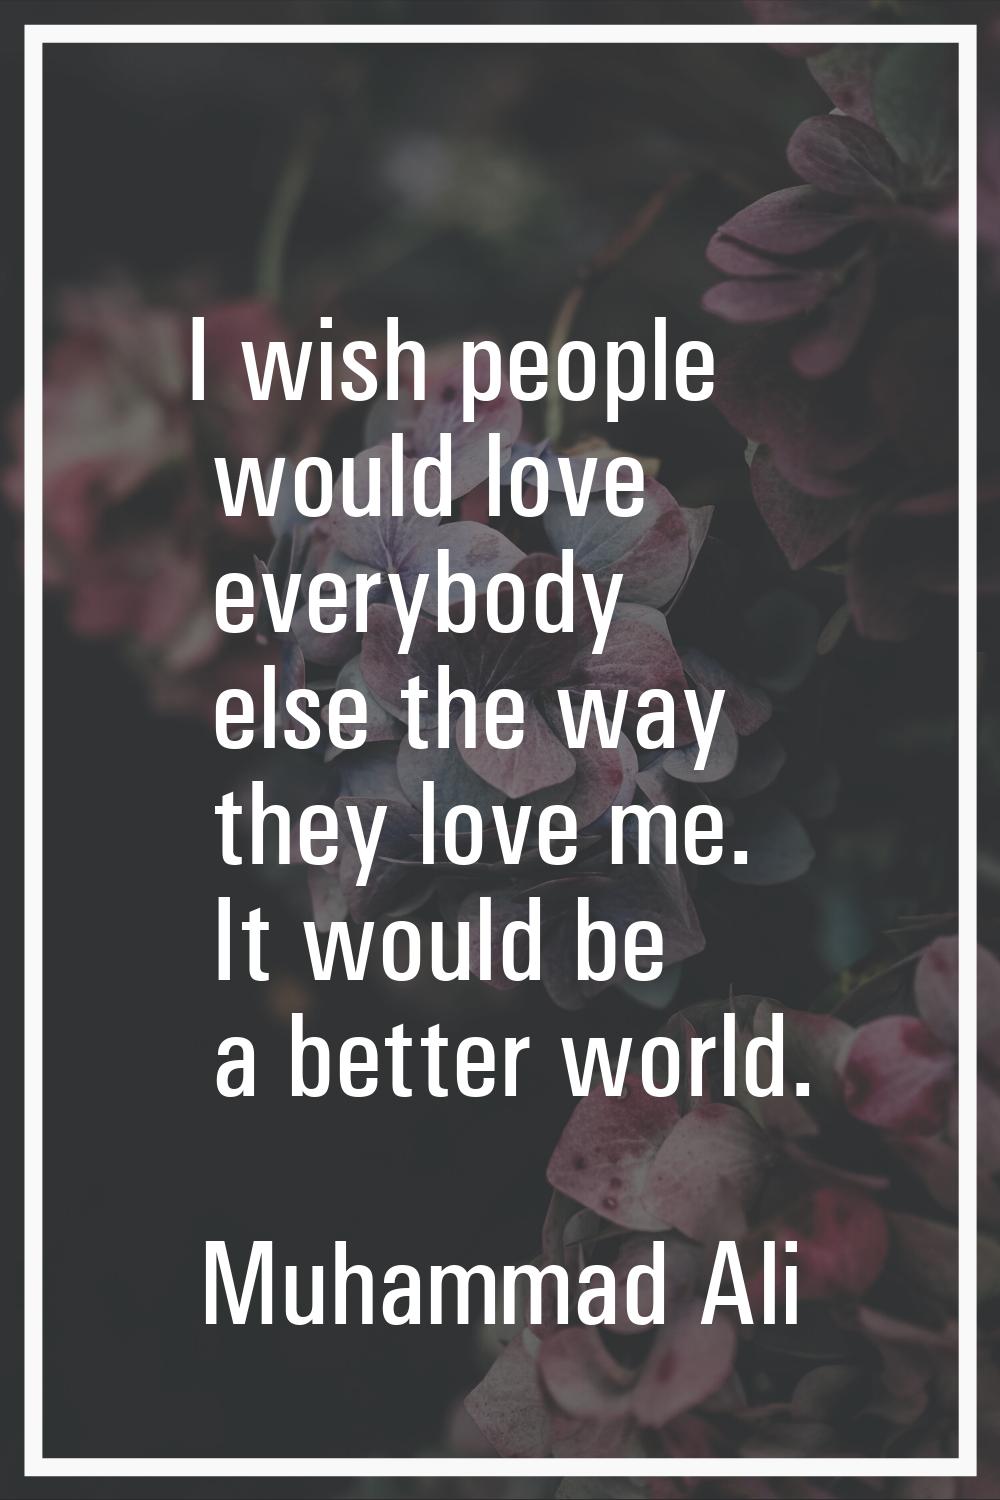 I wish people would love everybody else the way they love me. It would be a better world.